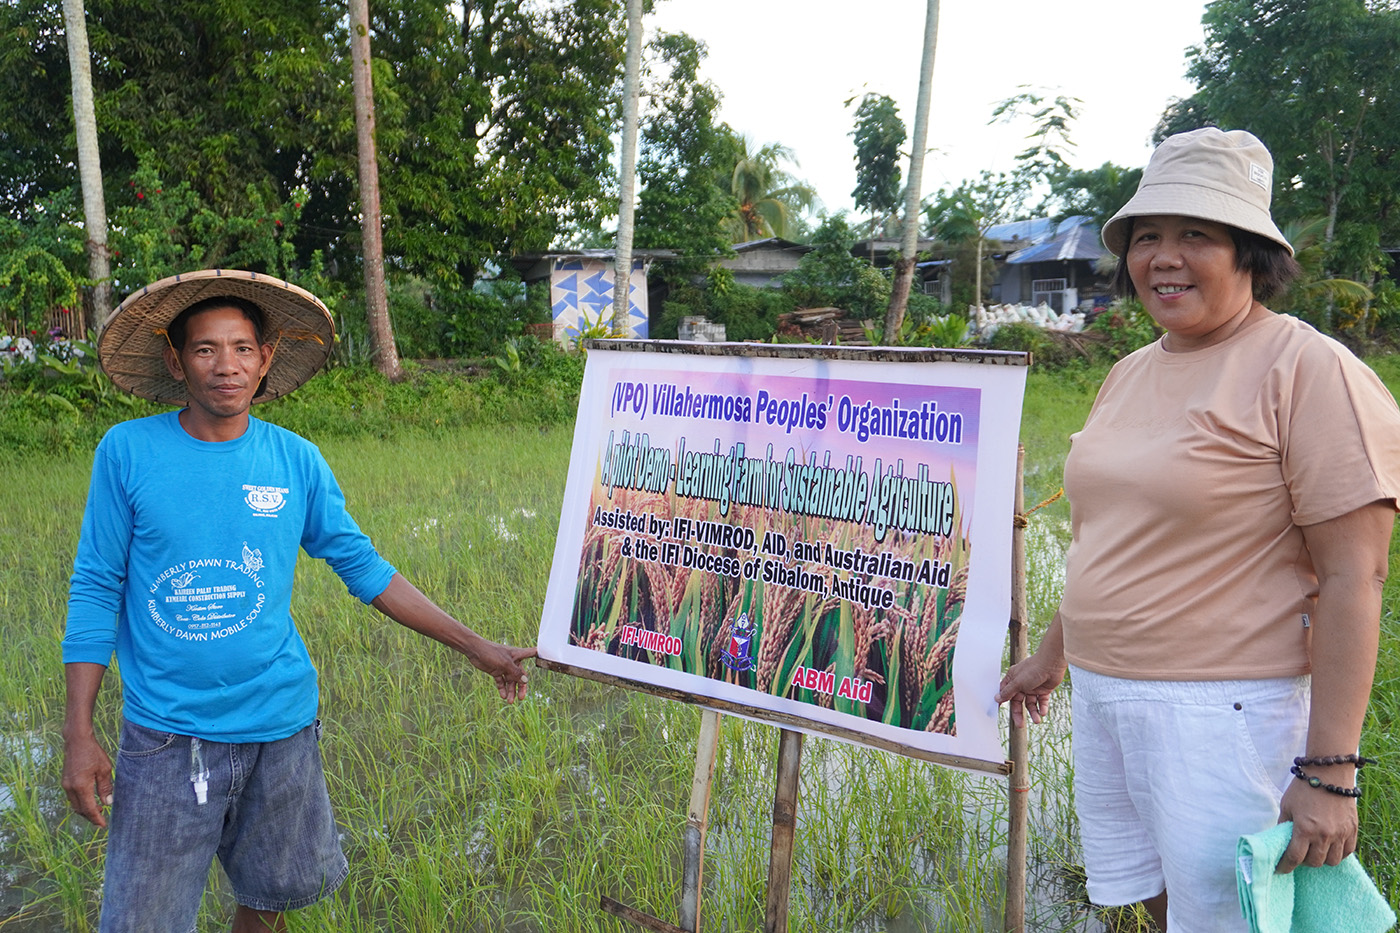 Members of Villahermosa People’s Organization (VPO) in Sibalom, Antique in their demonstration rice field. © IFI-VIMROD. Used with permission.